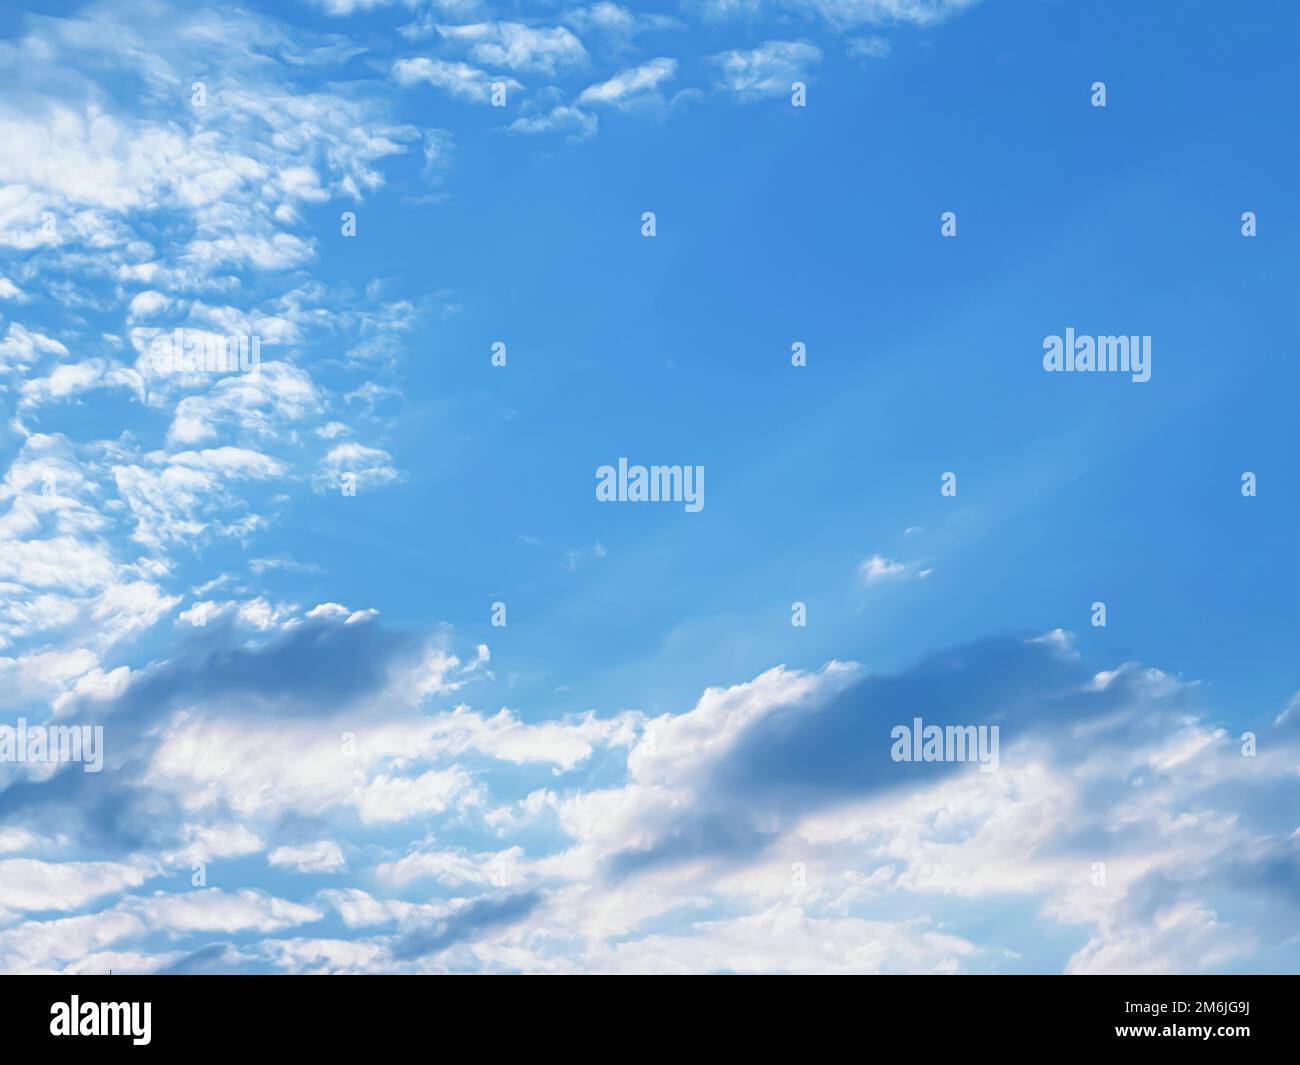 Sunny blue sky as abstract background, beauty in nature design Stock Photo